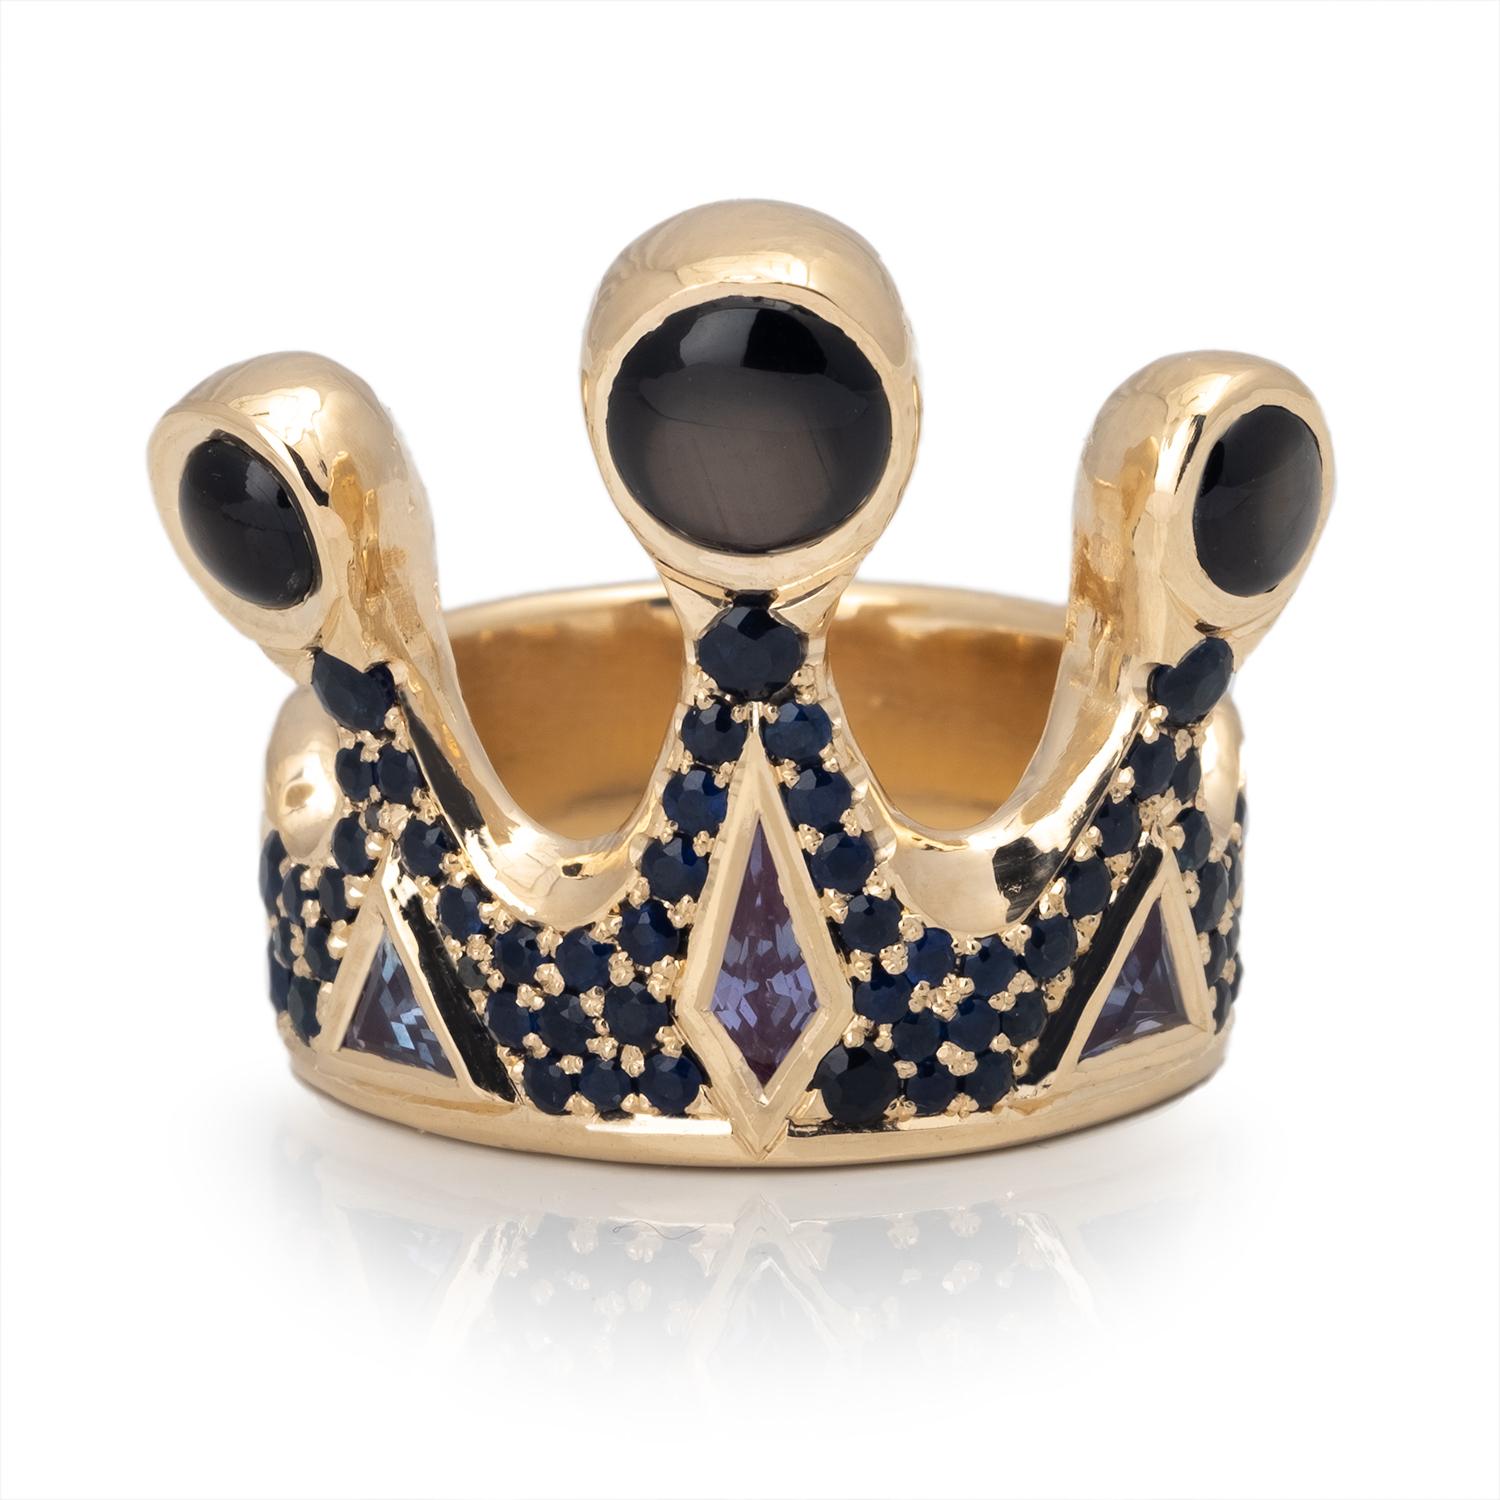 One of a Kind Crown Ring encrusted with blue sapphires and topped with Black Star Sapphires. This sculptural ring makes a bold statement and is a wearable work of art. If you like this ring, check out the companion piece in our collection. Listing